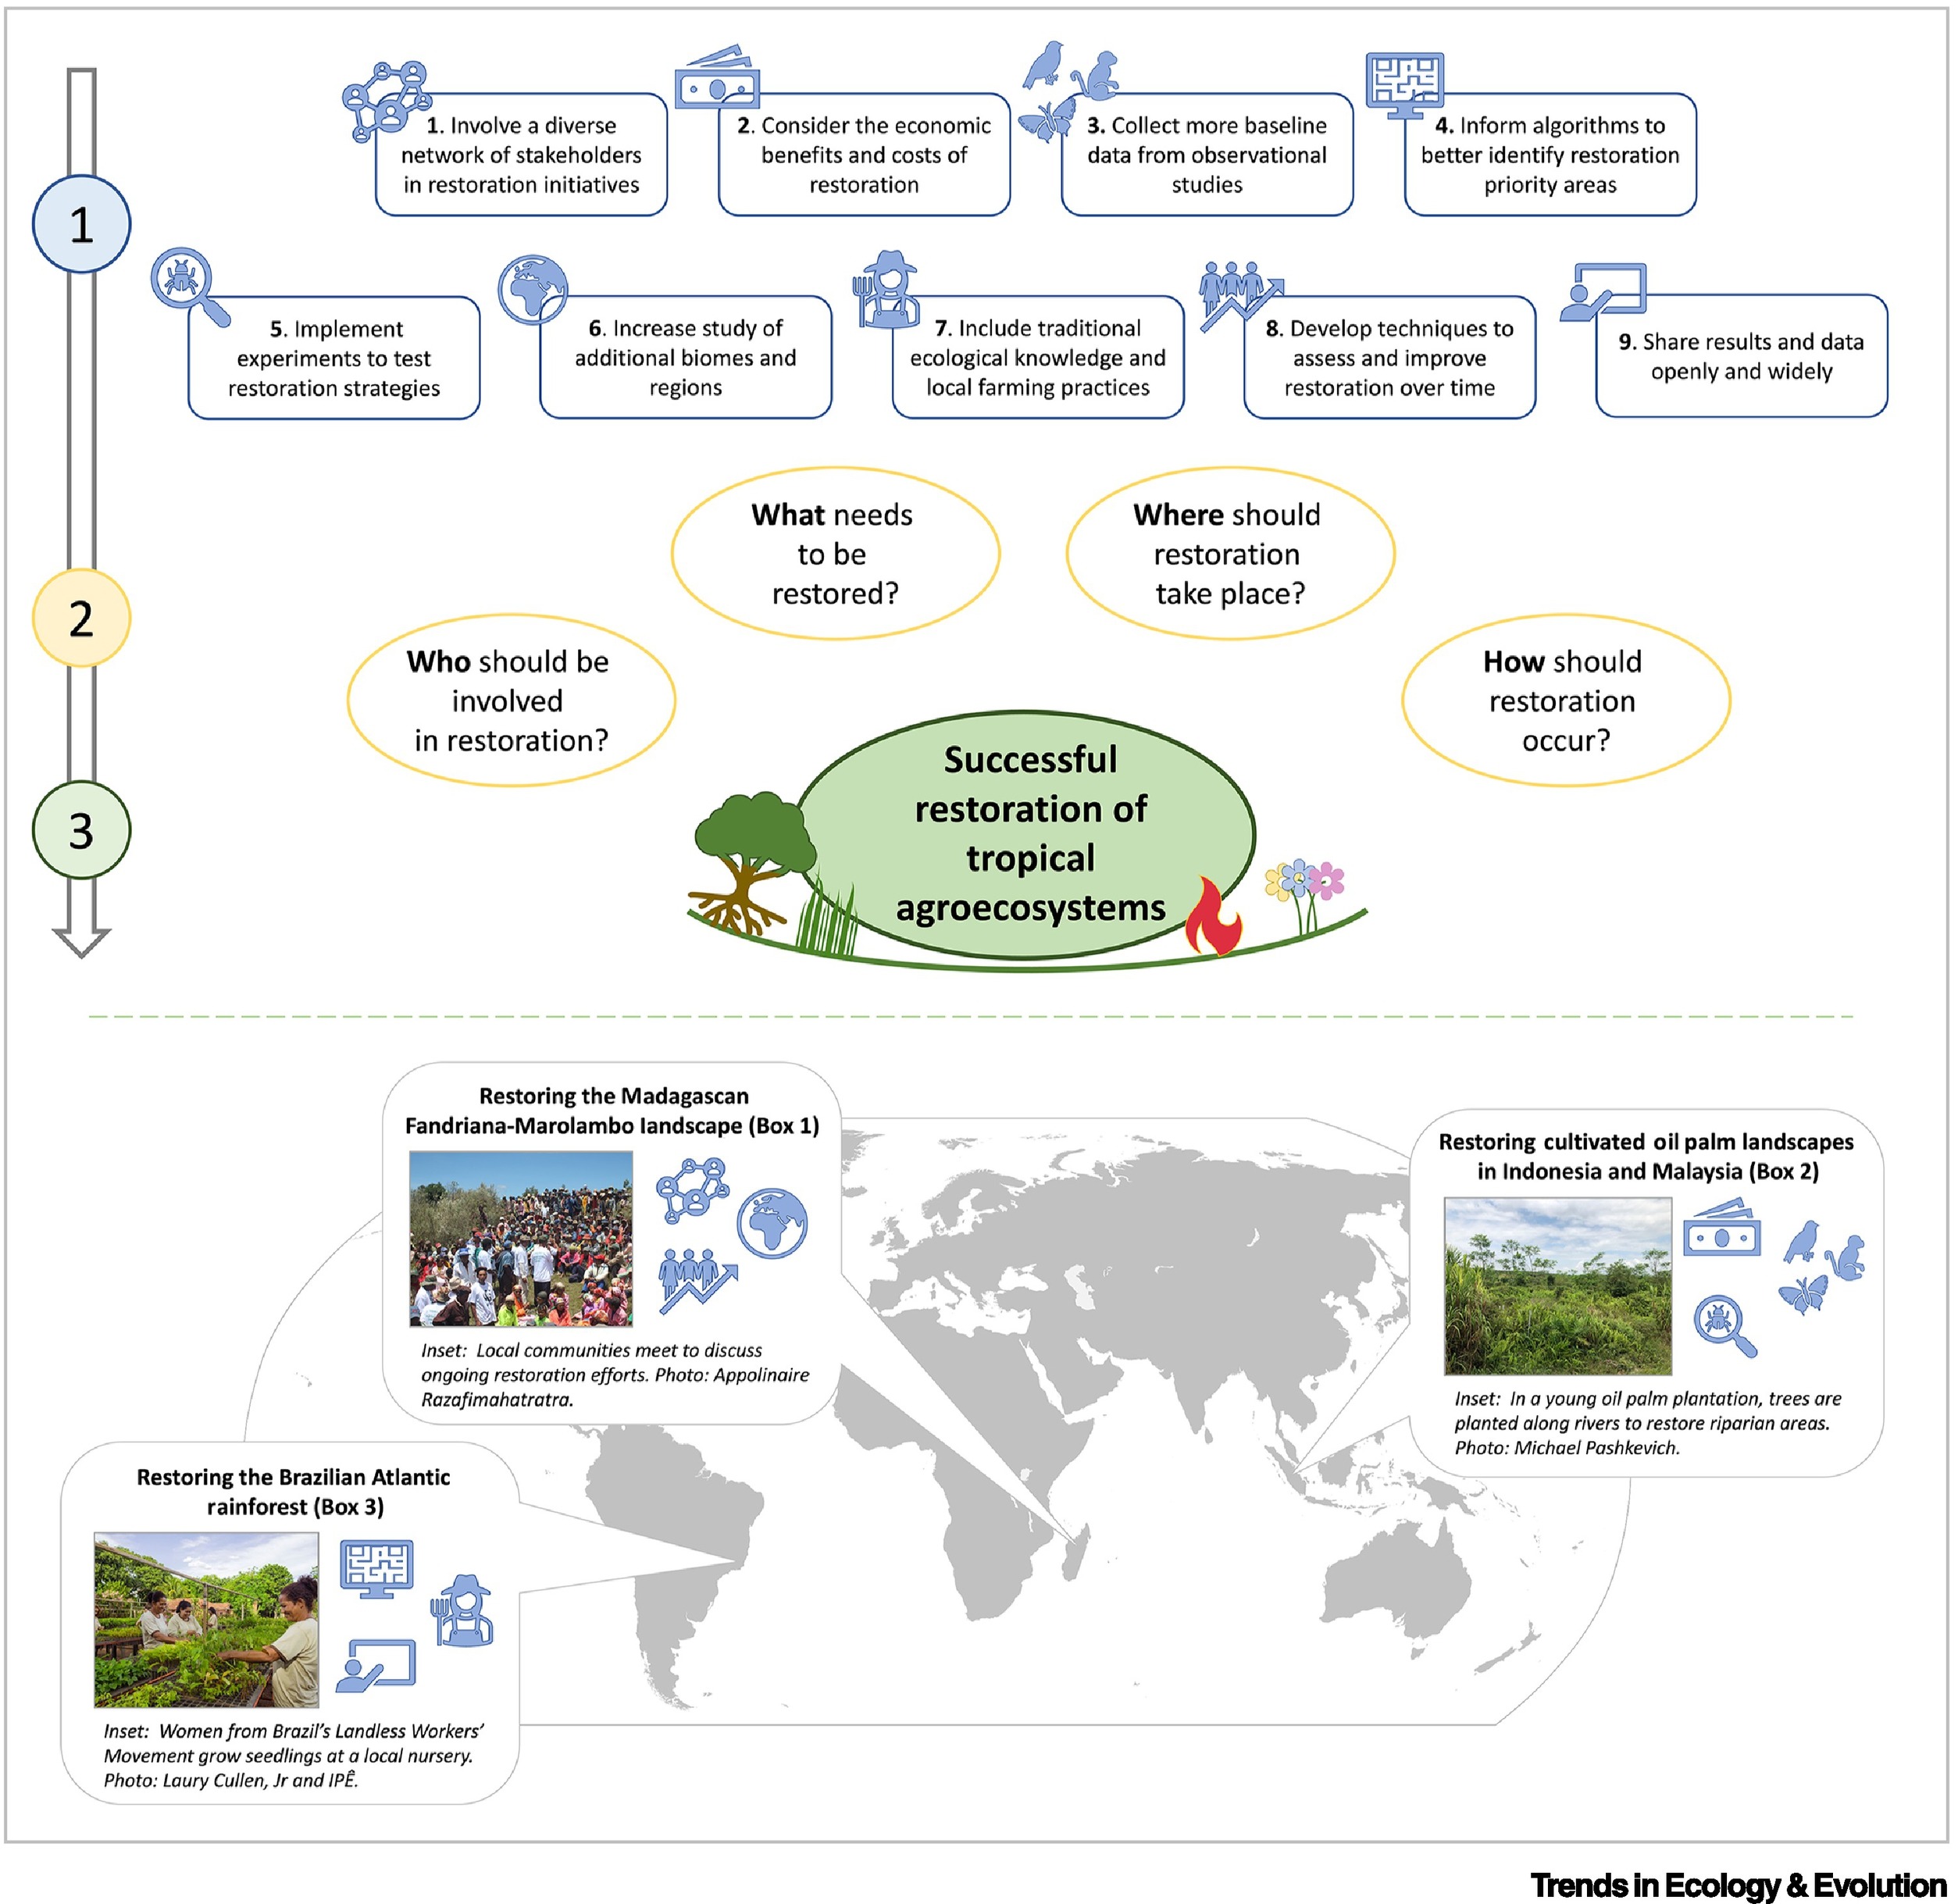 Diagram illustrating the nine actions to improve understanding of the ‘who’, ‘what’, ‘where’, and ‘how’ to restore tropical agroecosystems.